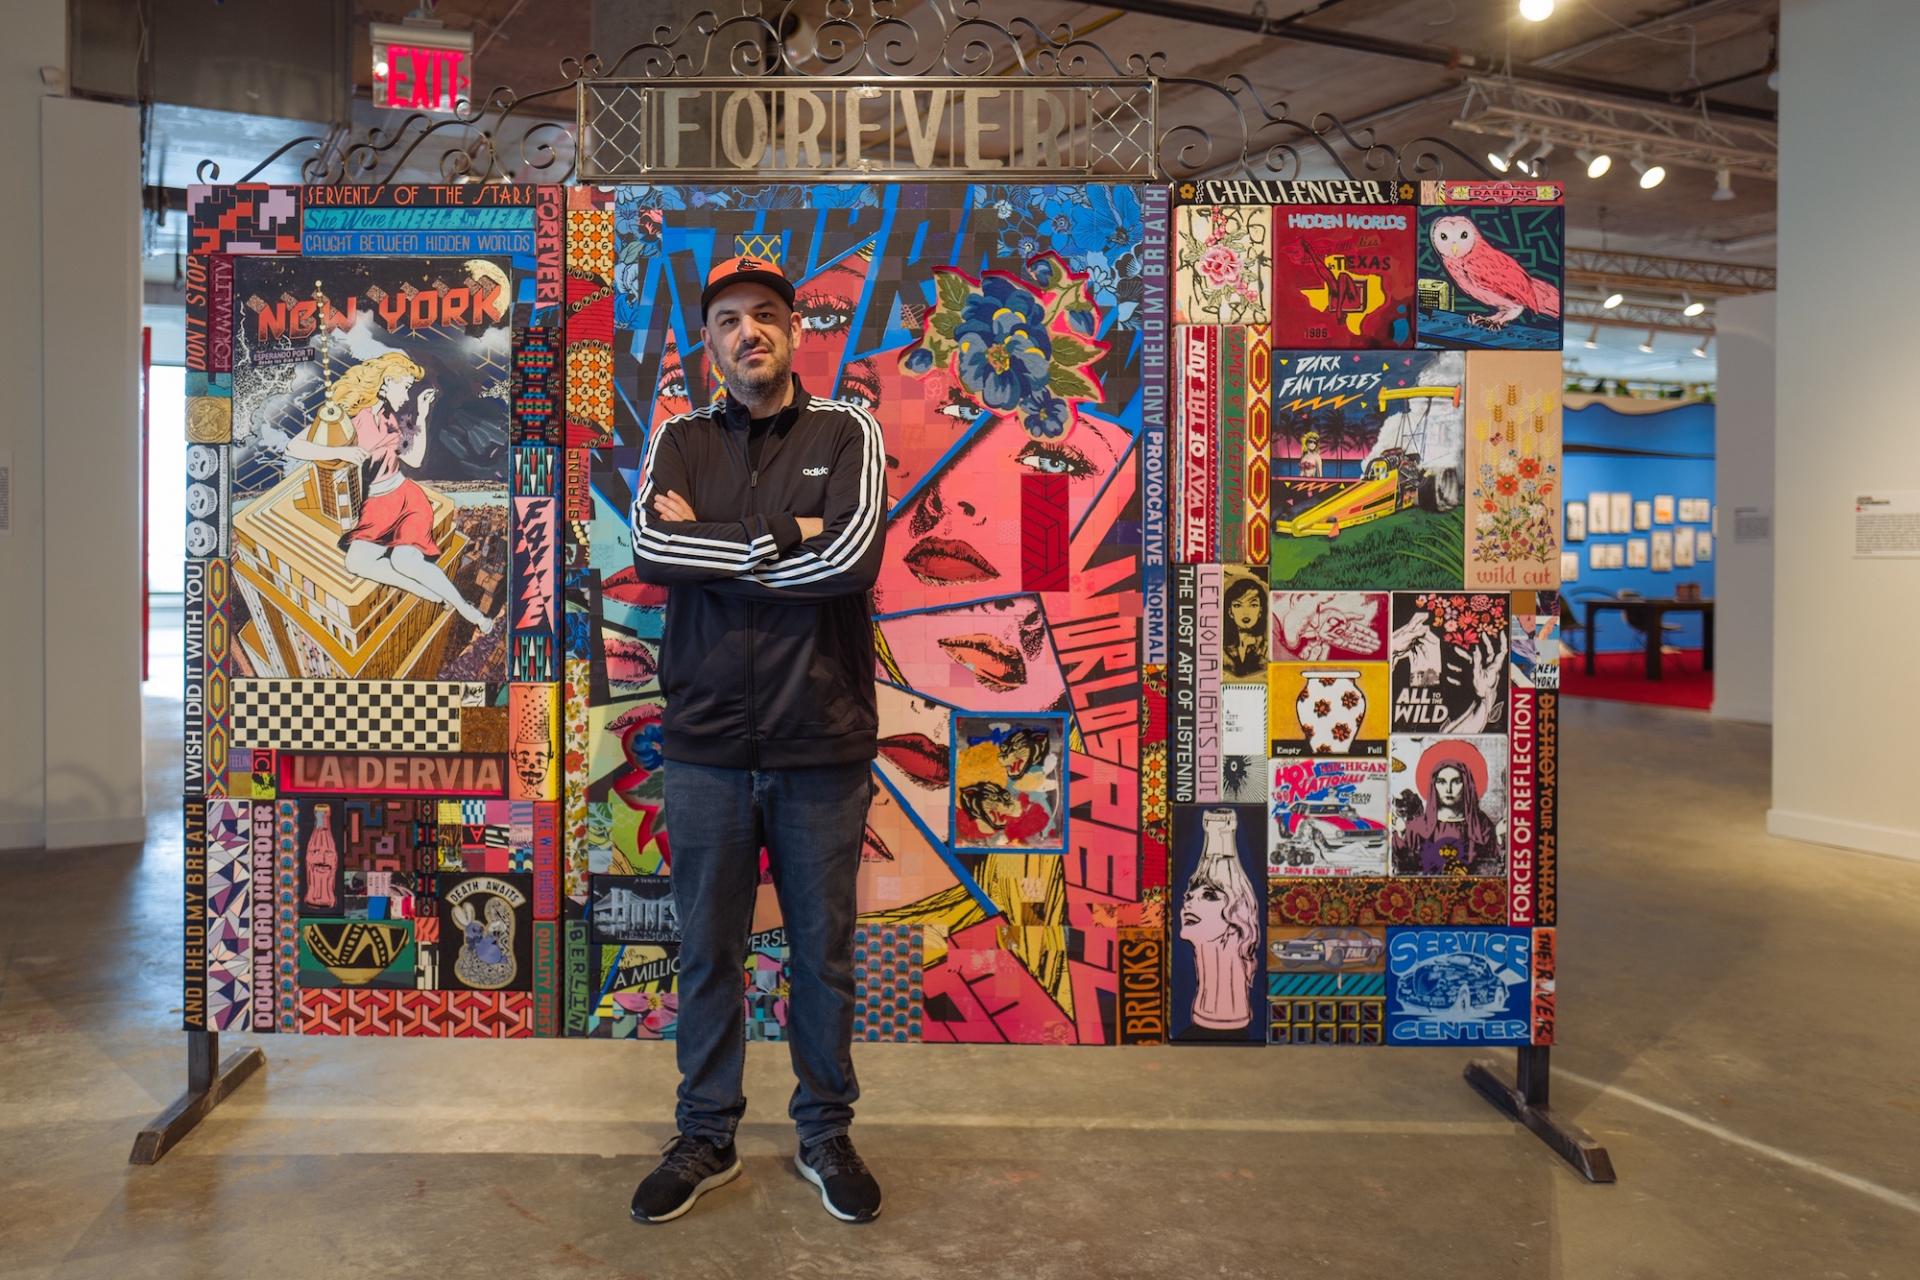 Graffiti and Street Art Make Their Way Into the Saatchi Gallery with "Beyond the Streets London"